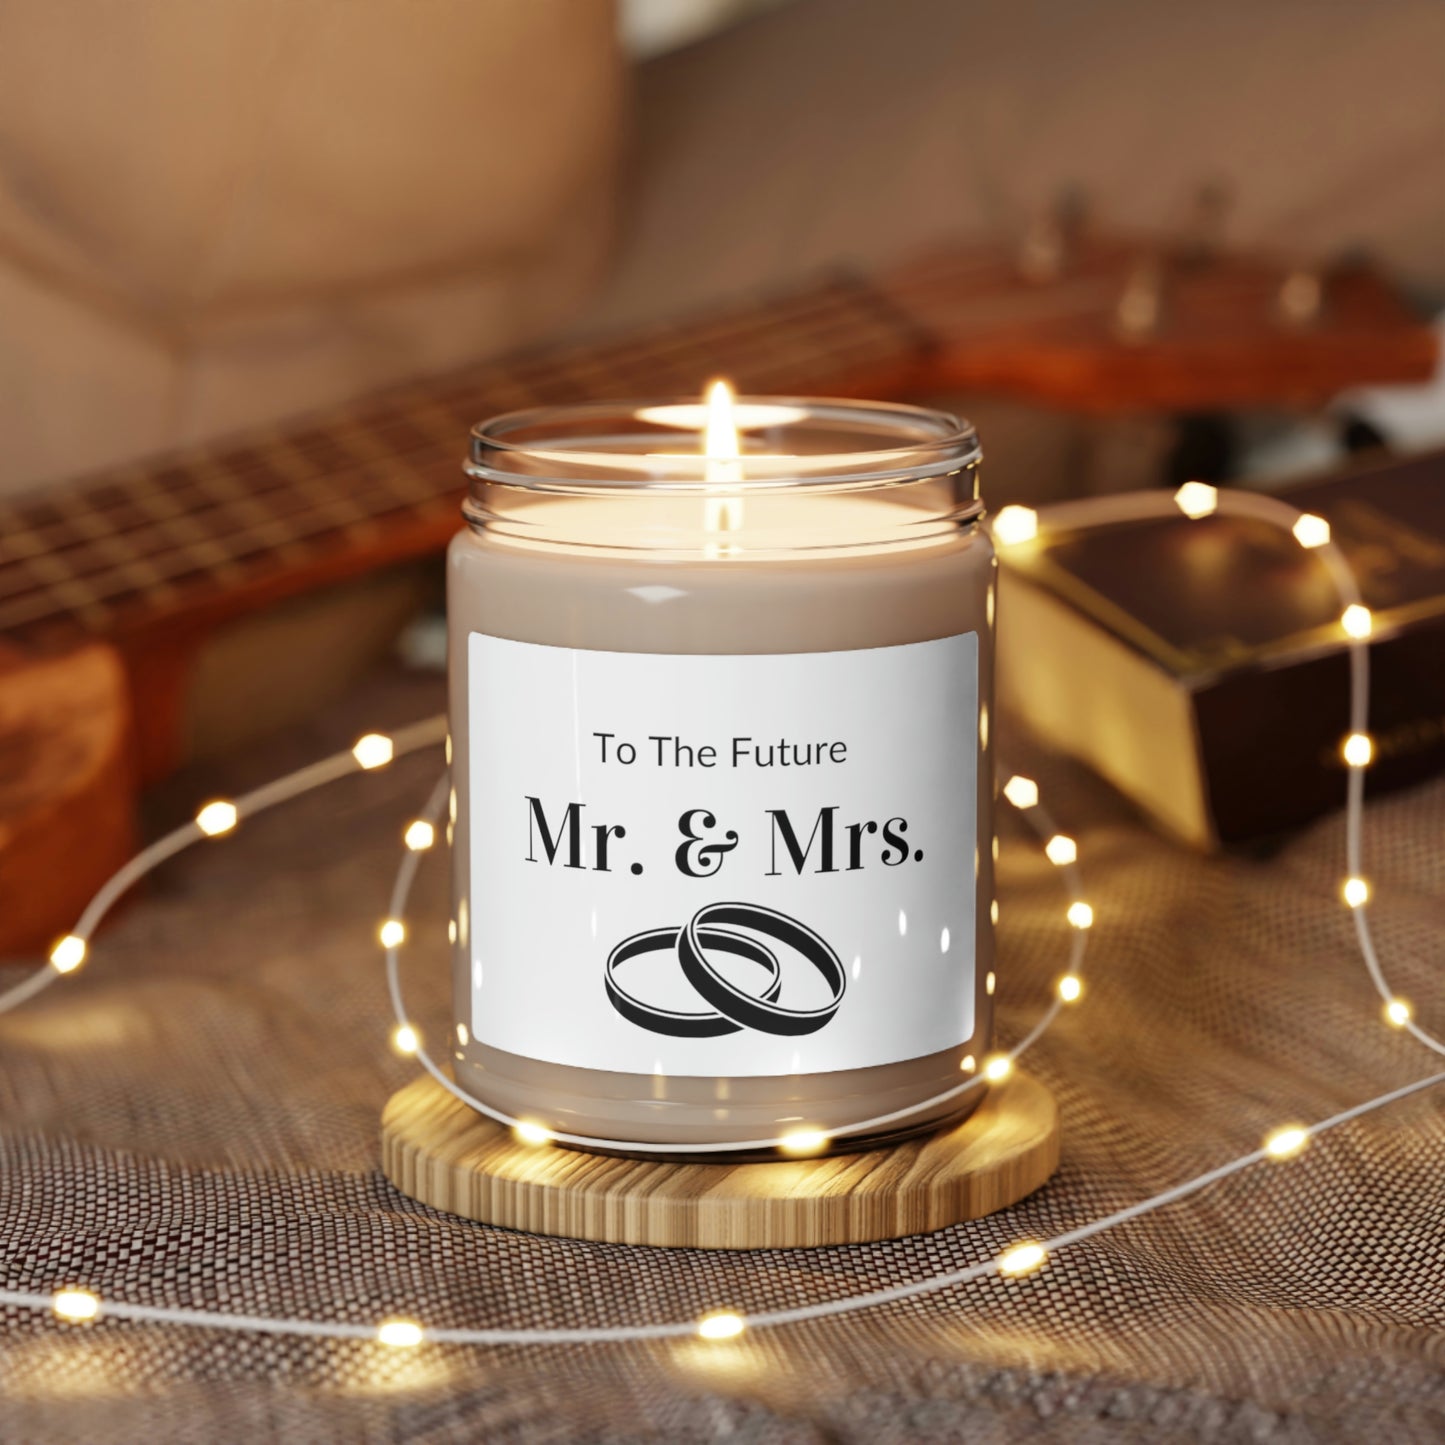 Mr. & Mrs. Wedding Candle, Wedding Gifts, Gifts for her